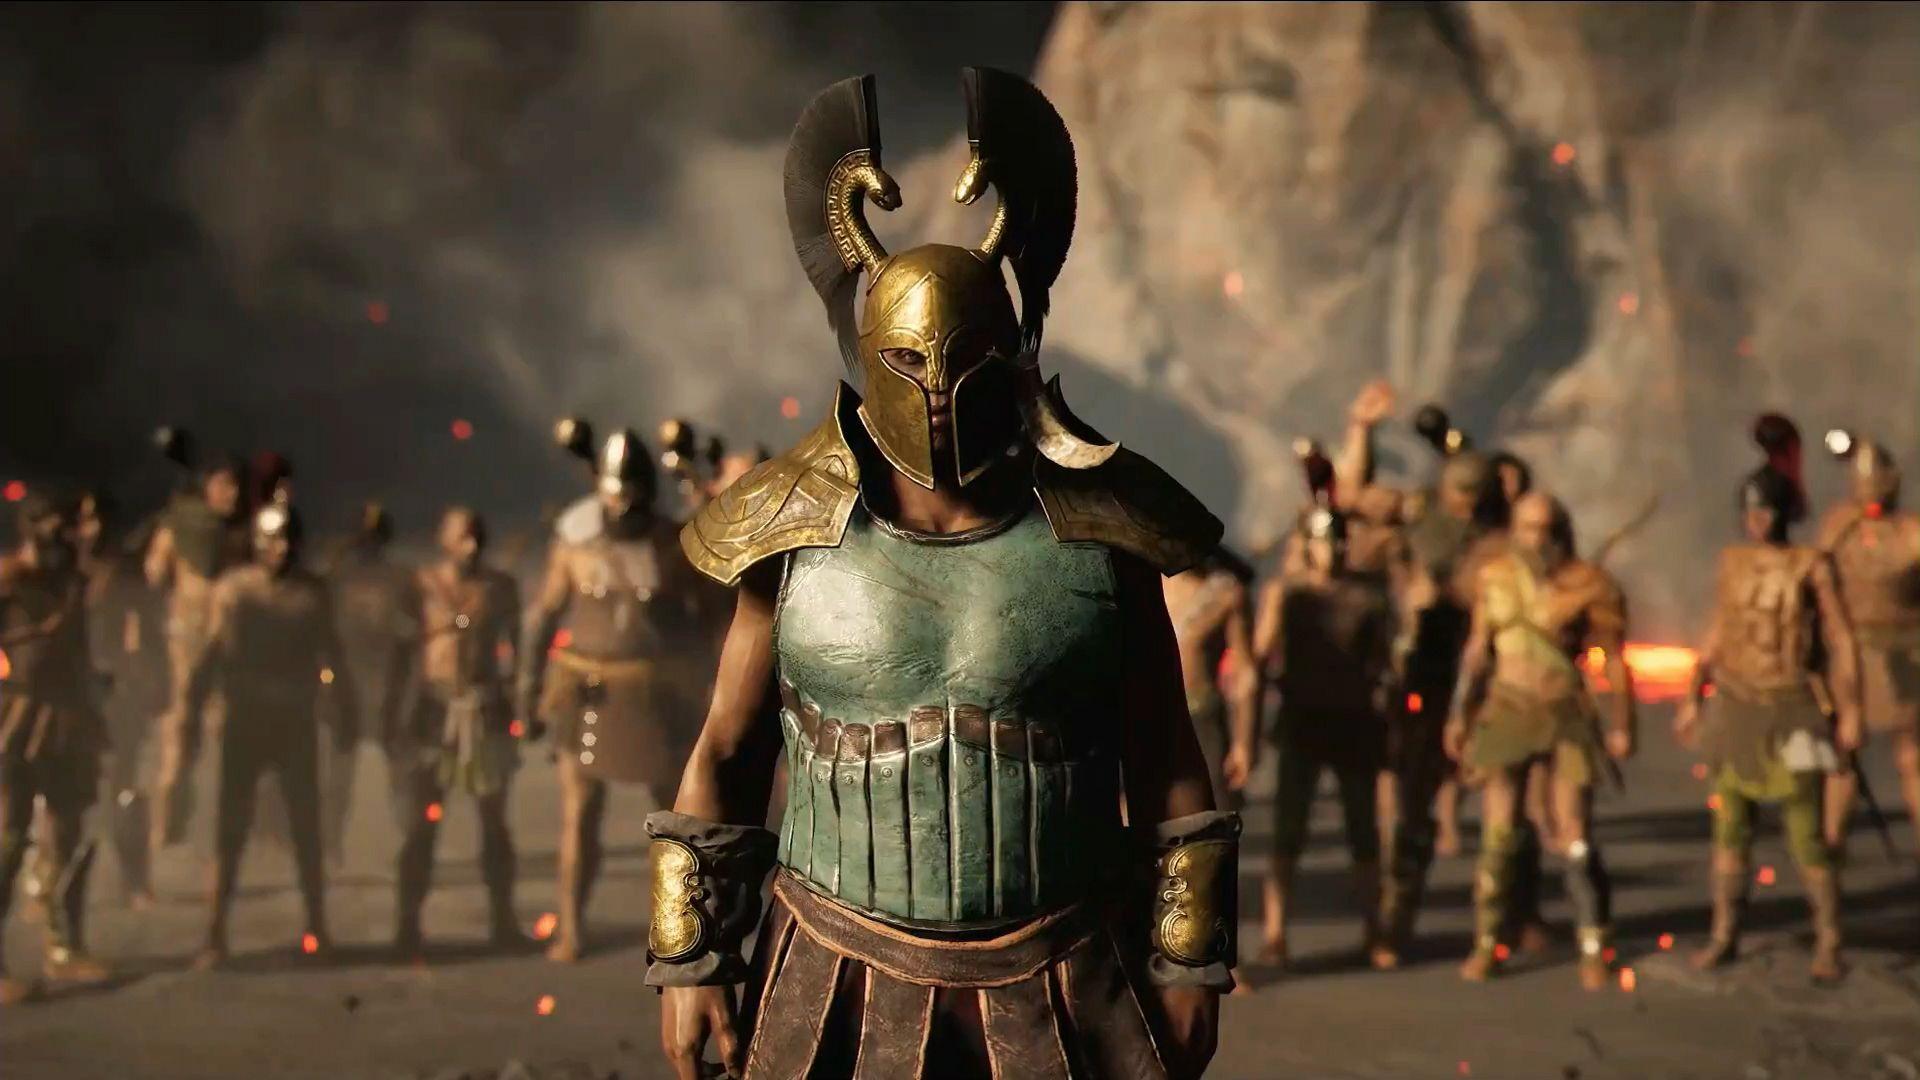 Assassin's Creed Odyssey gameplay trailer debuts at E3 2018